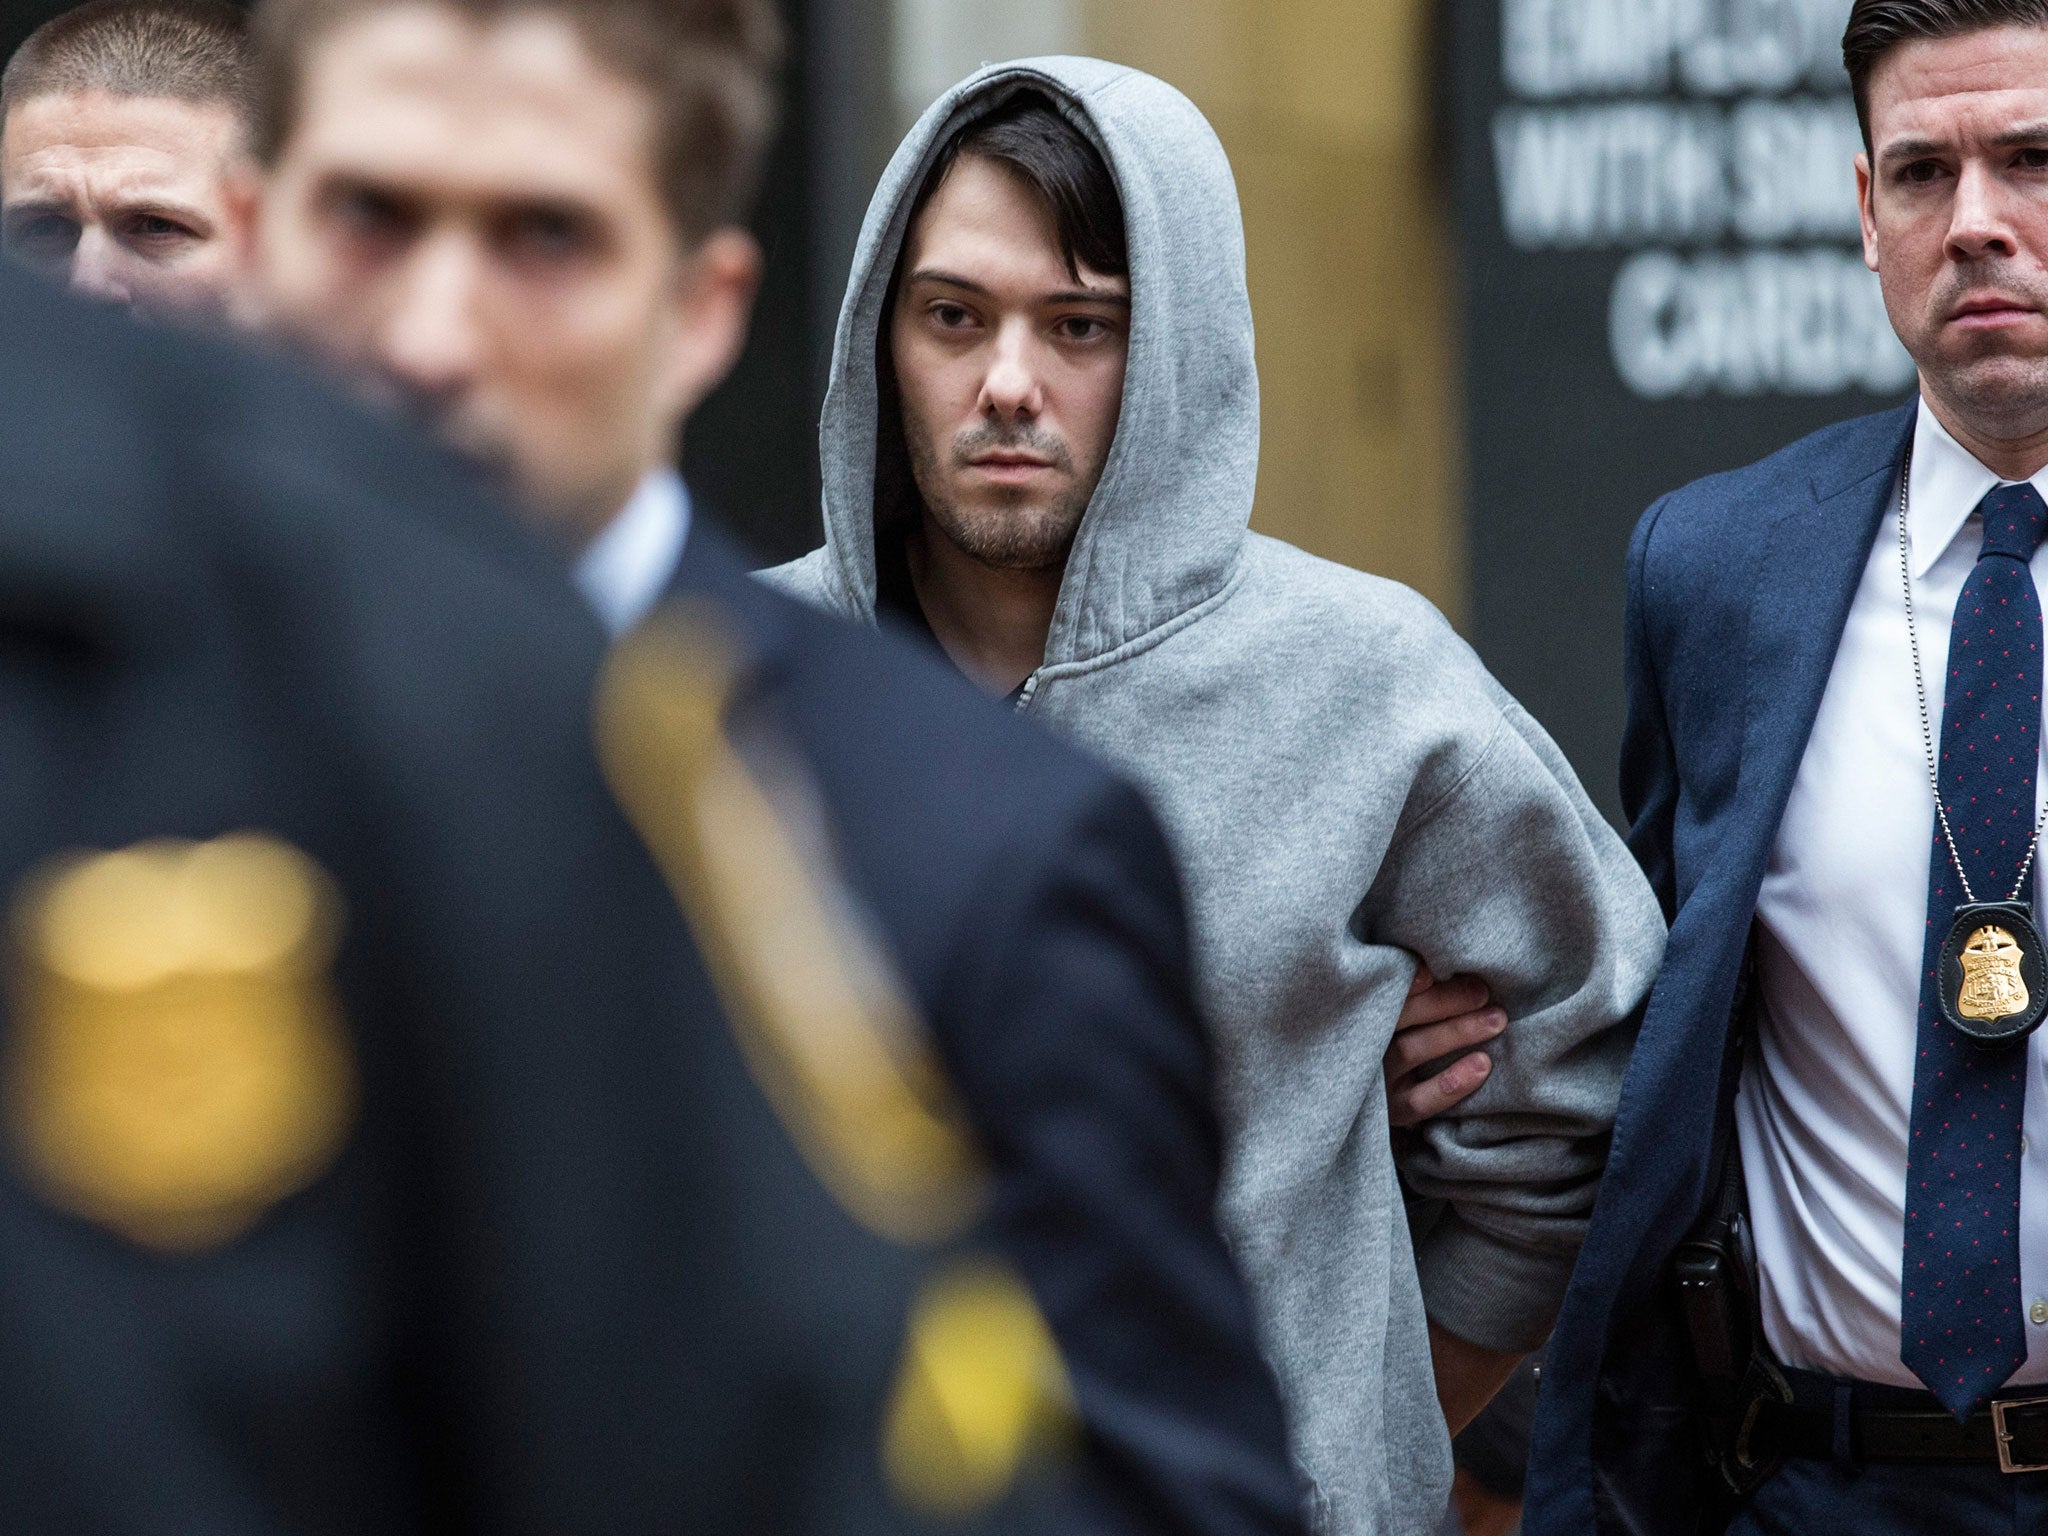 Martin Shkreli, the former CEO of Turing Pharmaceutical, being arrested for securities fraud